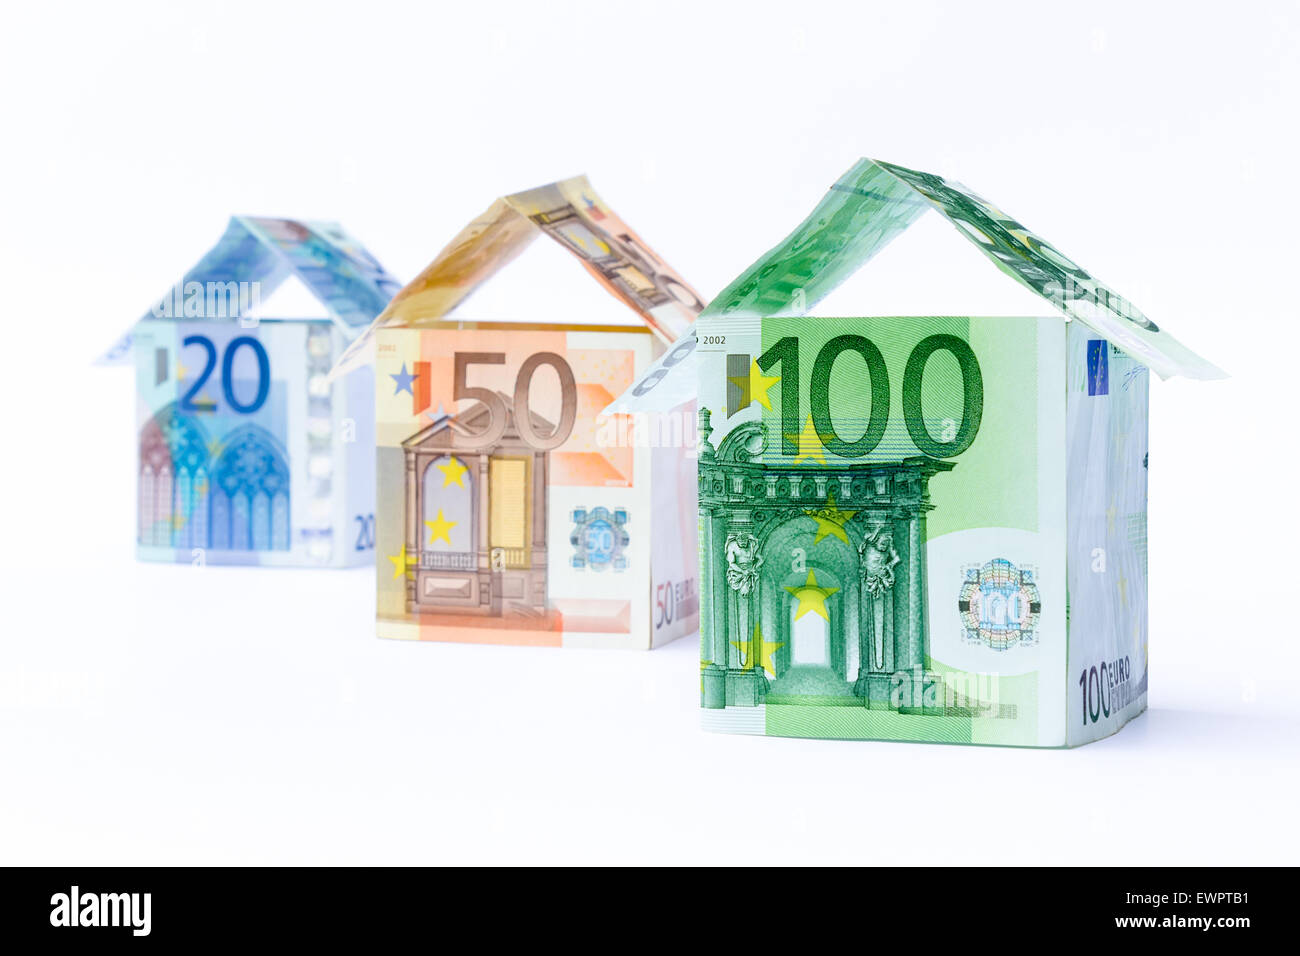 Three houses made of bank euro bills standing in a row isolated on white background Stock Photo